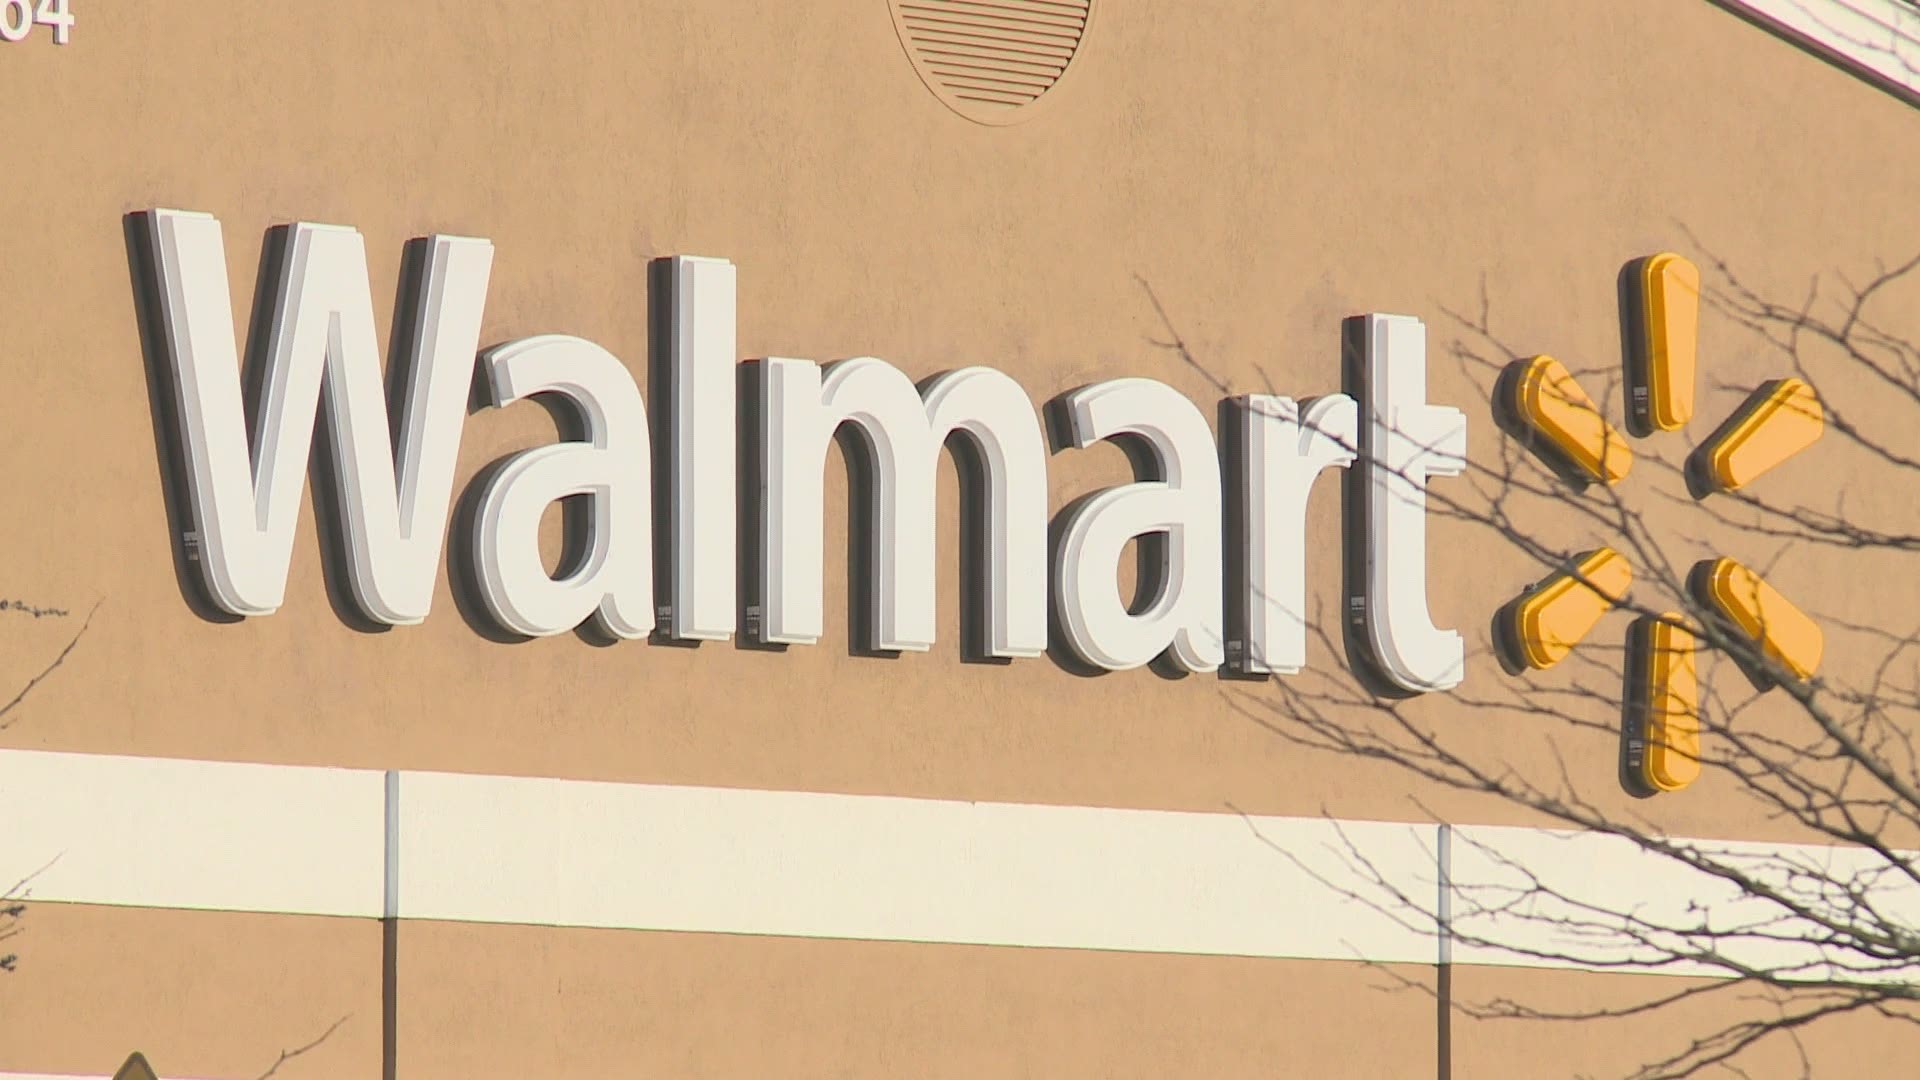 Walmart says this was a misinterpretation of the guidelines set by the state of Connecticut.